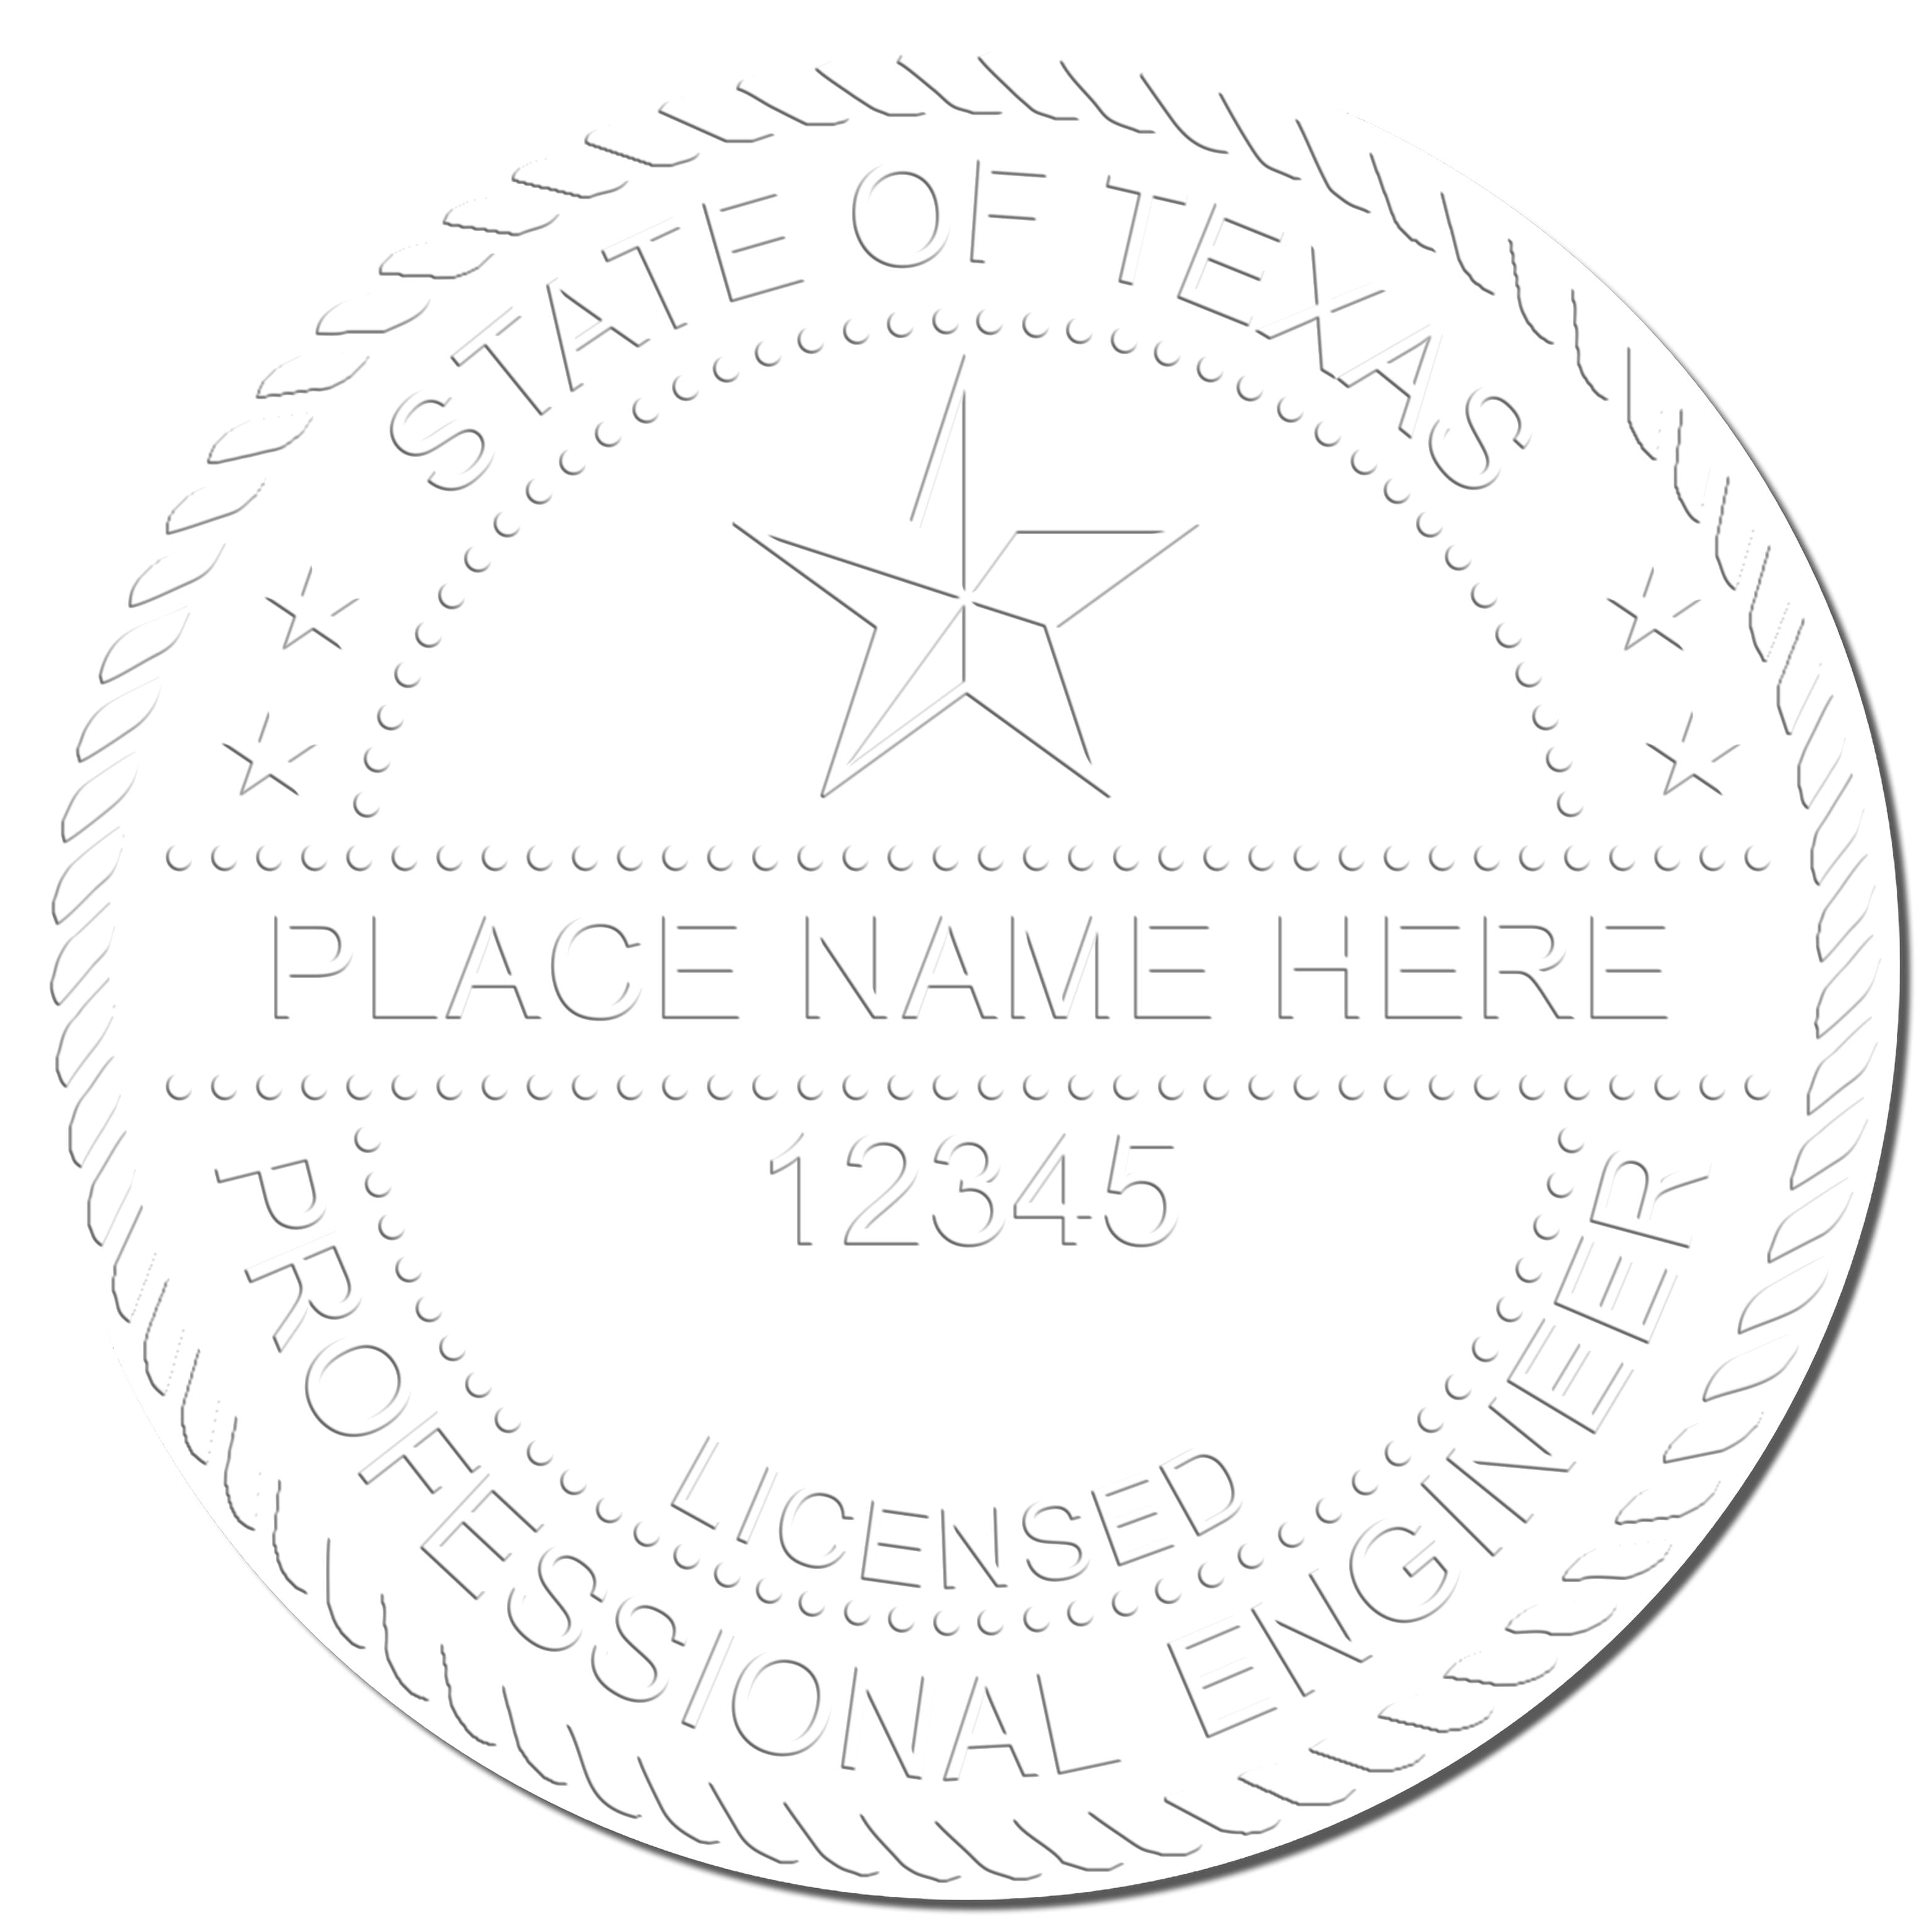 This paper is stamped with a sample imprint of the Heavy Duty Cast Iron Texas Engineer Seal Embosser, signifying its quality and reliability.